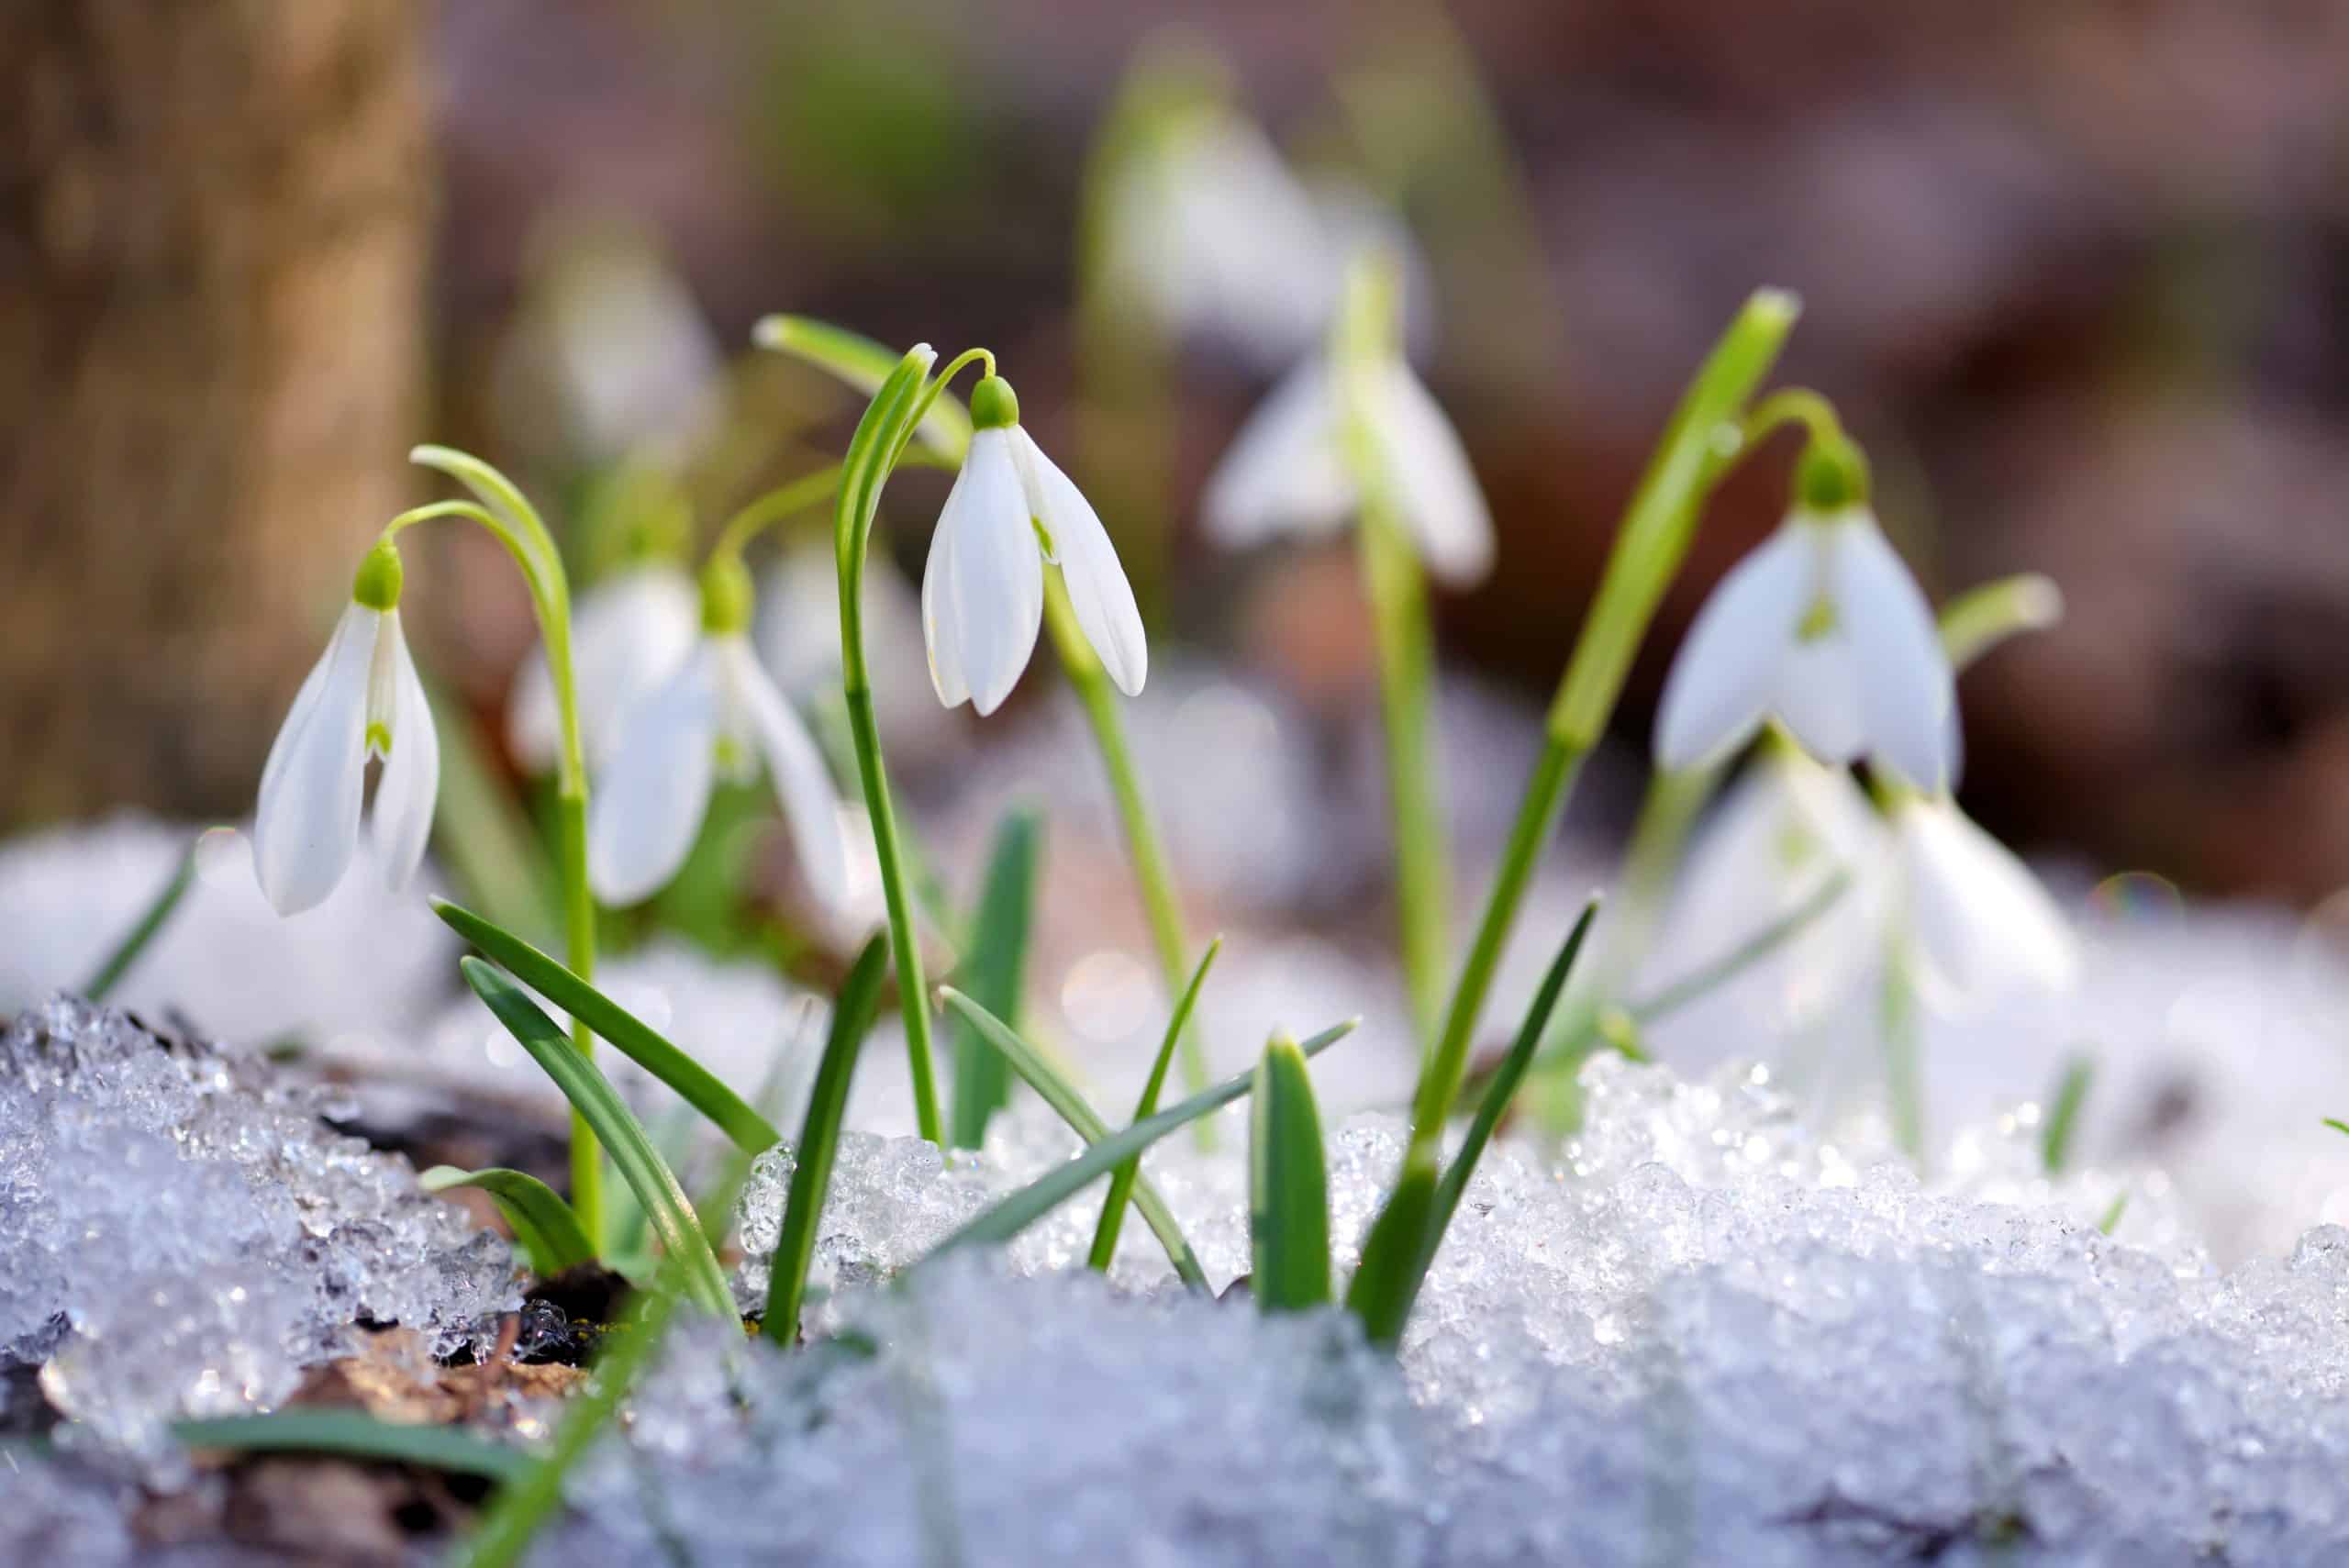 Snowdrops in the spring forest.